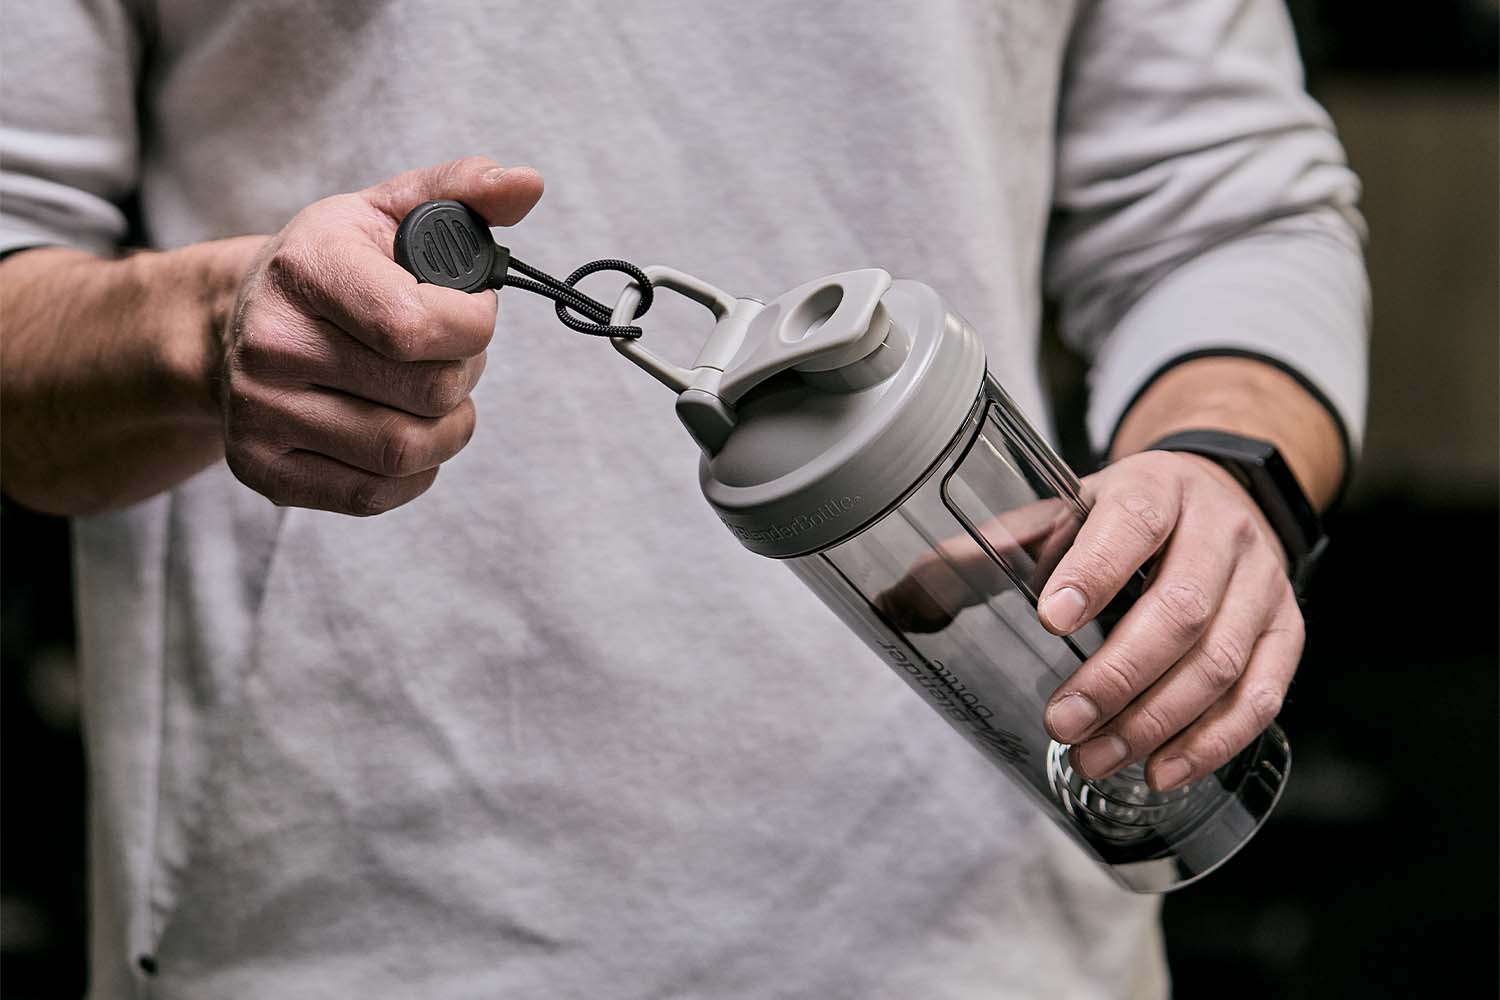 Man holding a BlenderBottle with an attached hanging magnet